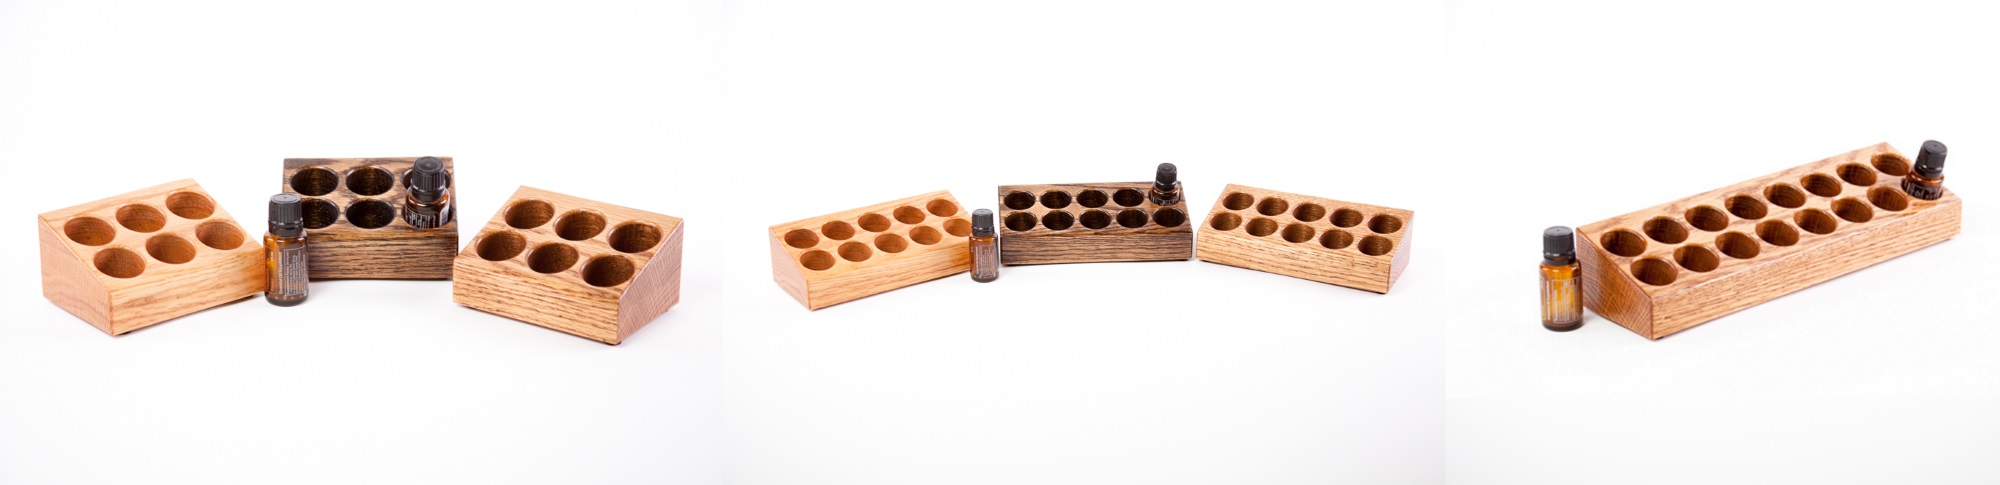 Essential Oil Table Trays for Essential Oil Storage with bottles and various stains